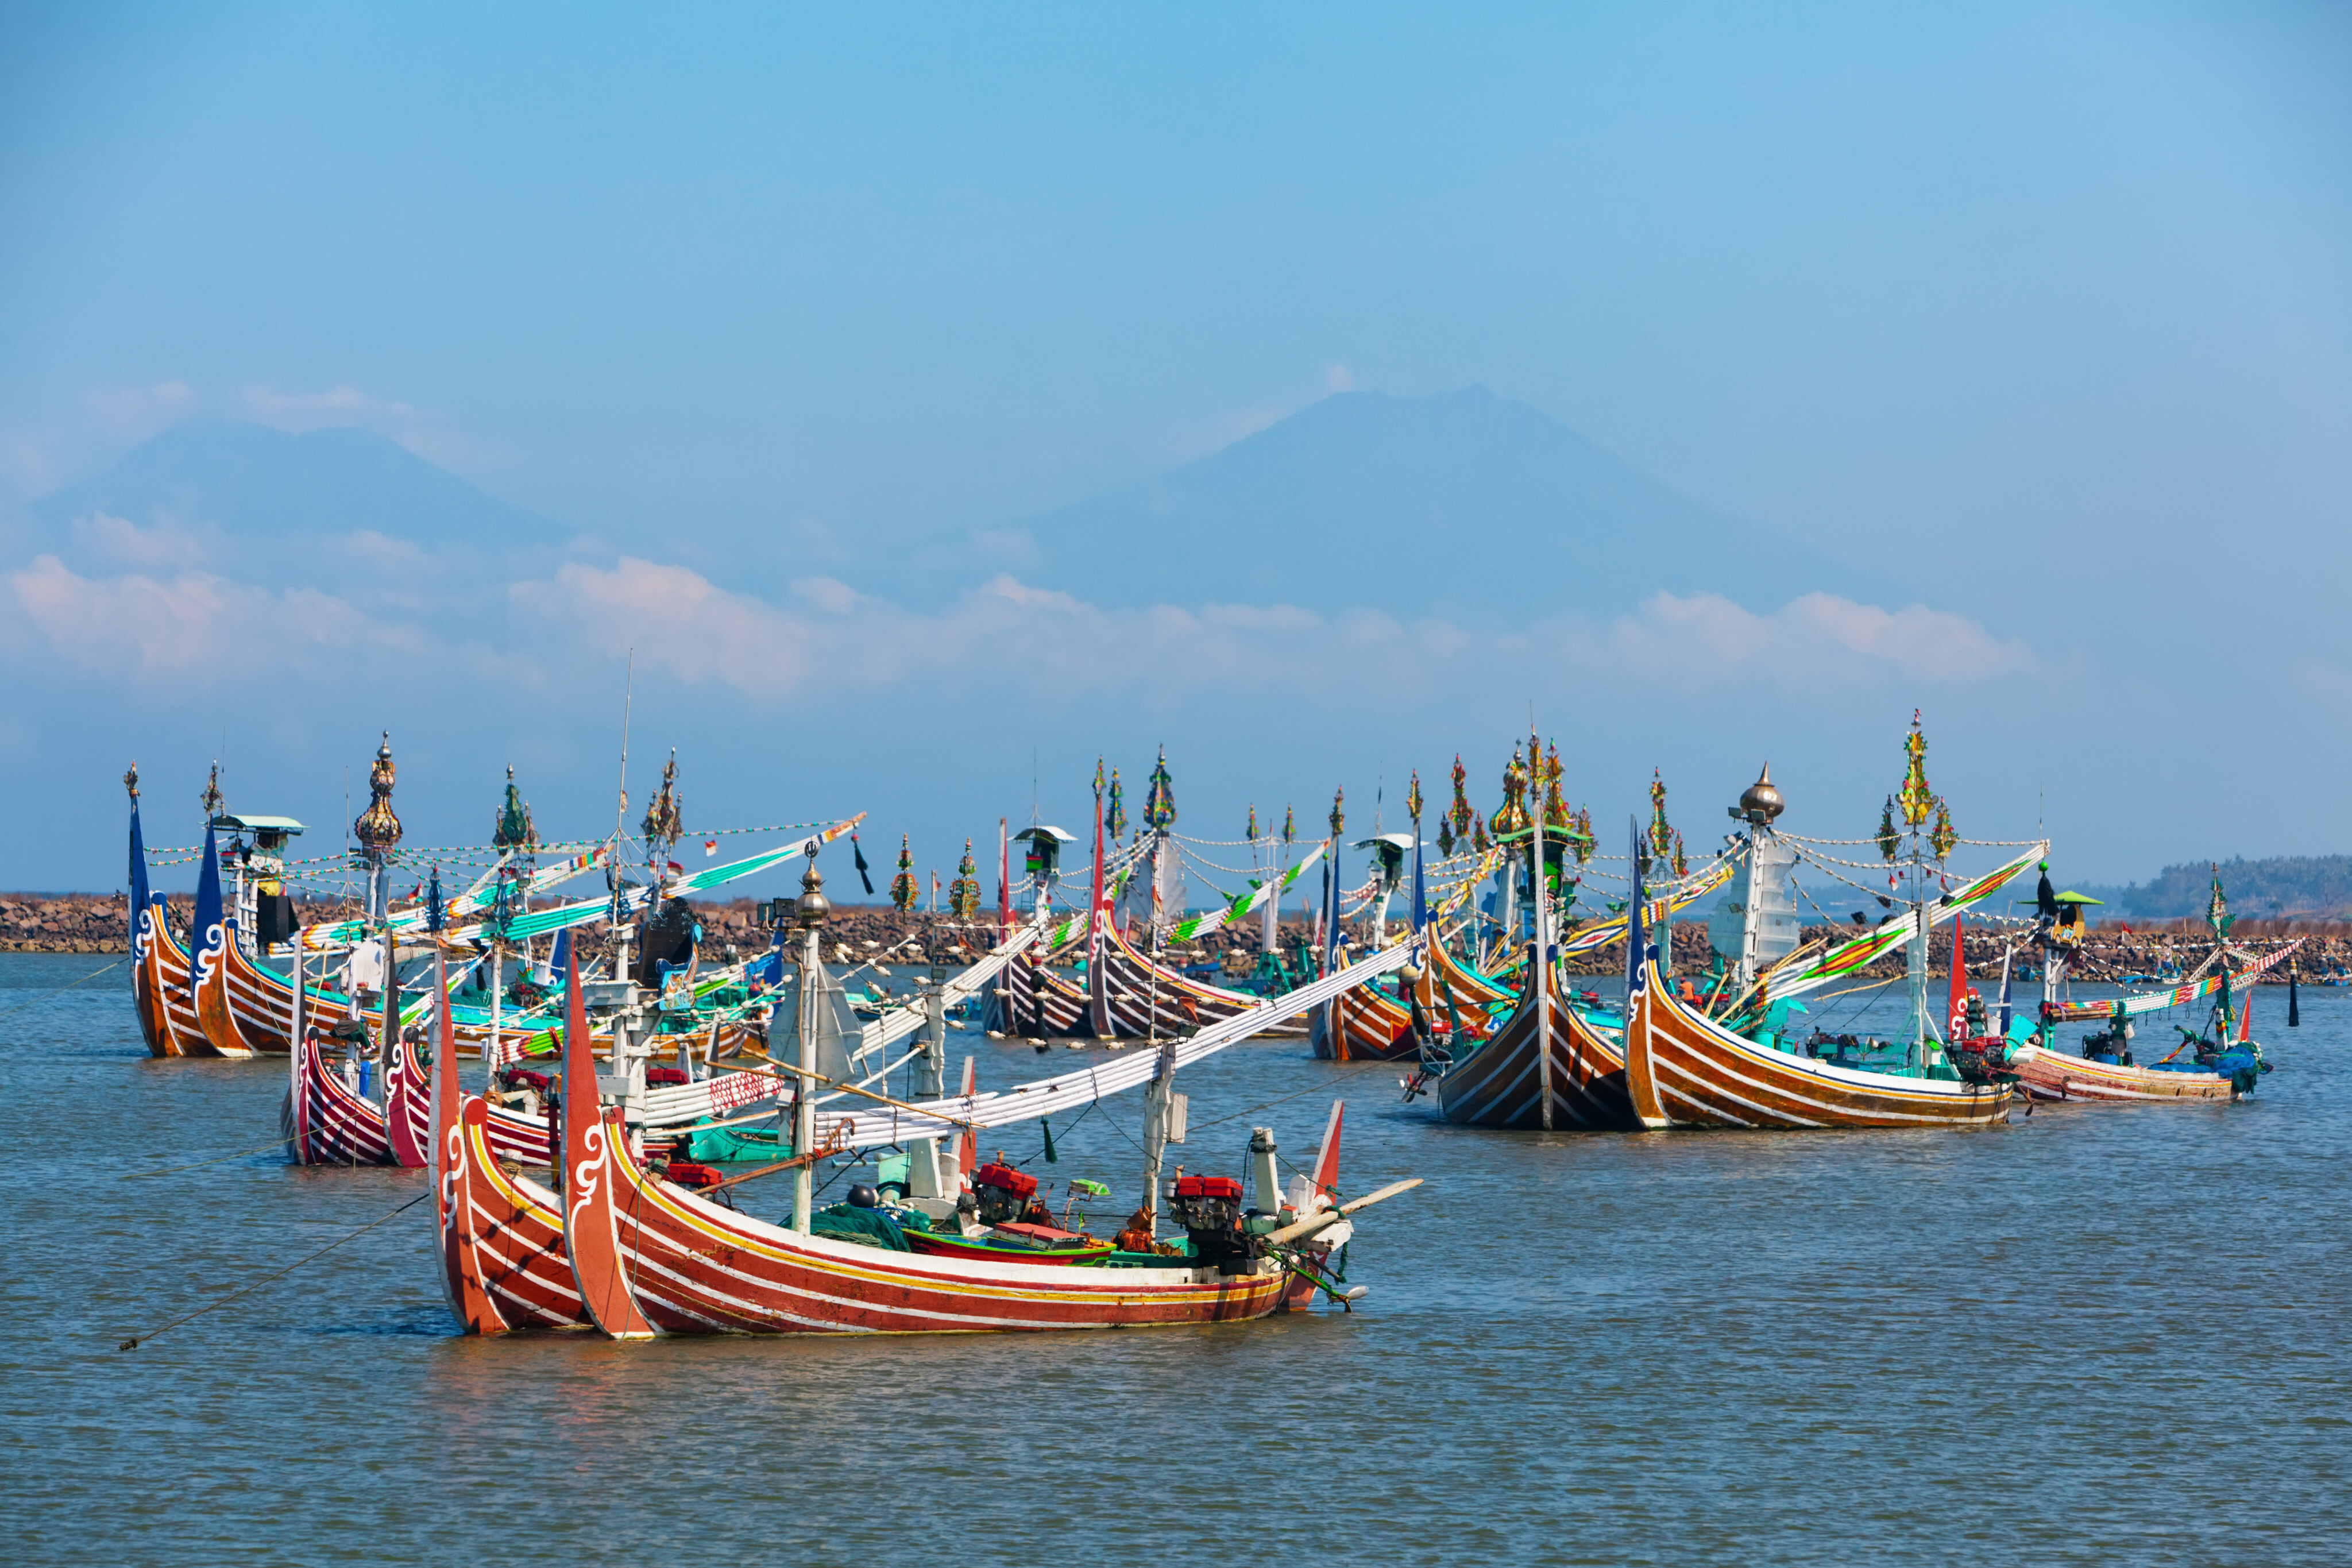 Multicoloured fishing boats moor near the village of Perancak on the west coast of the Indonesian island of Bali. Photo: Getty Images / iStockphoto